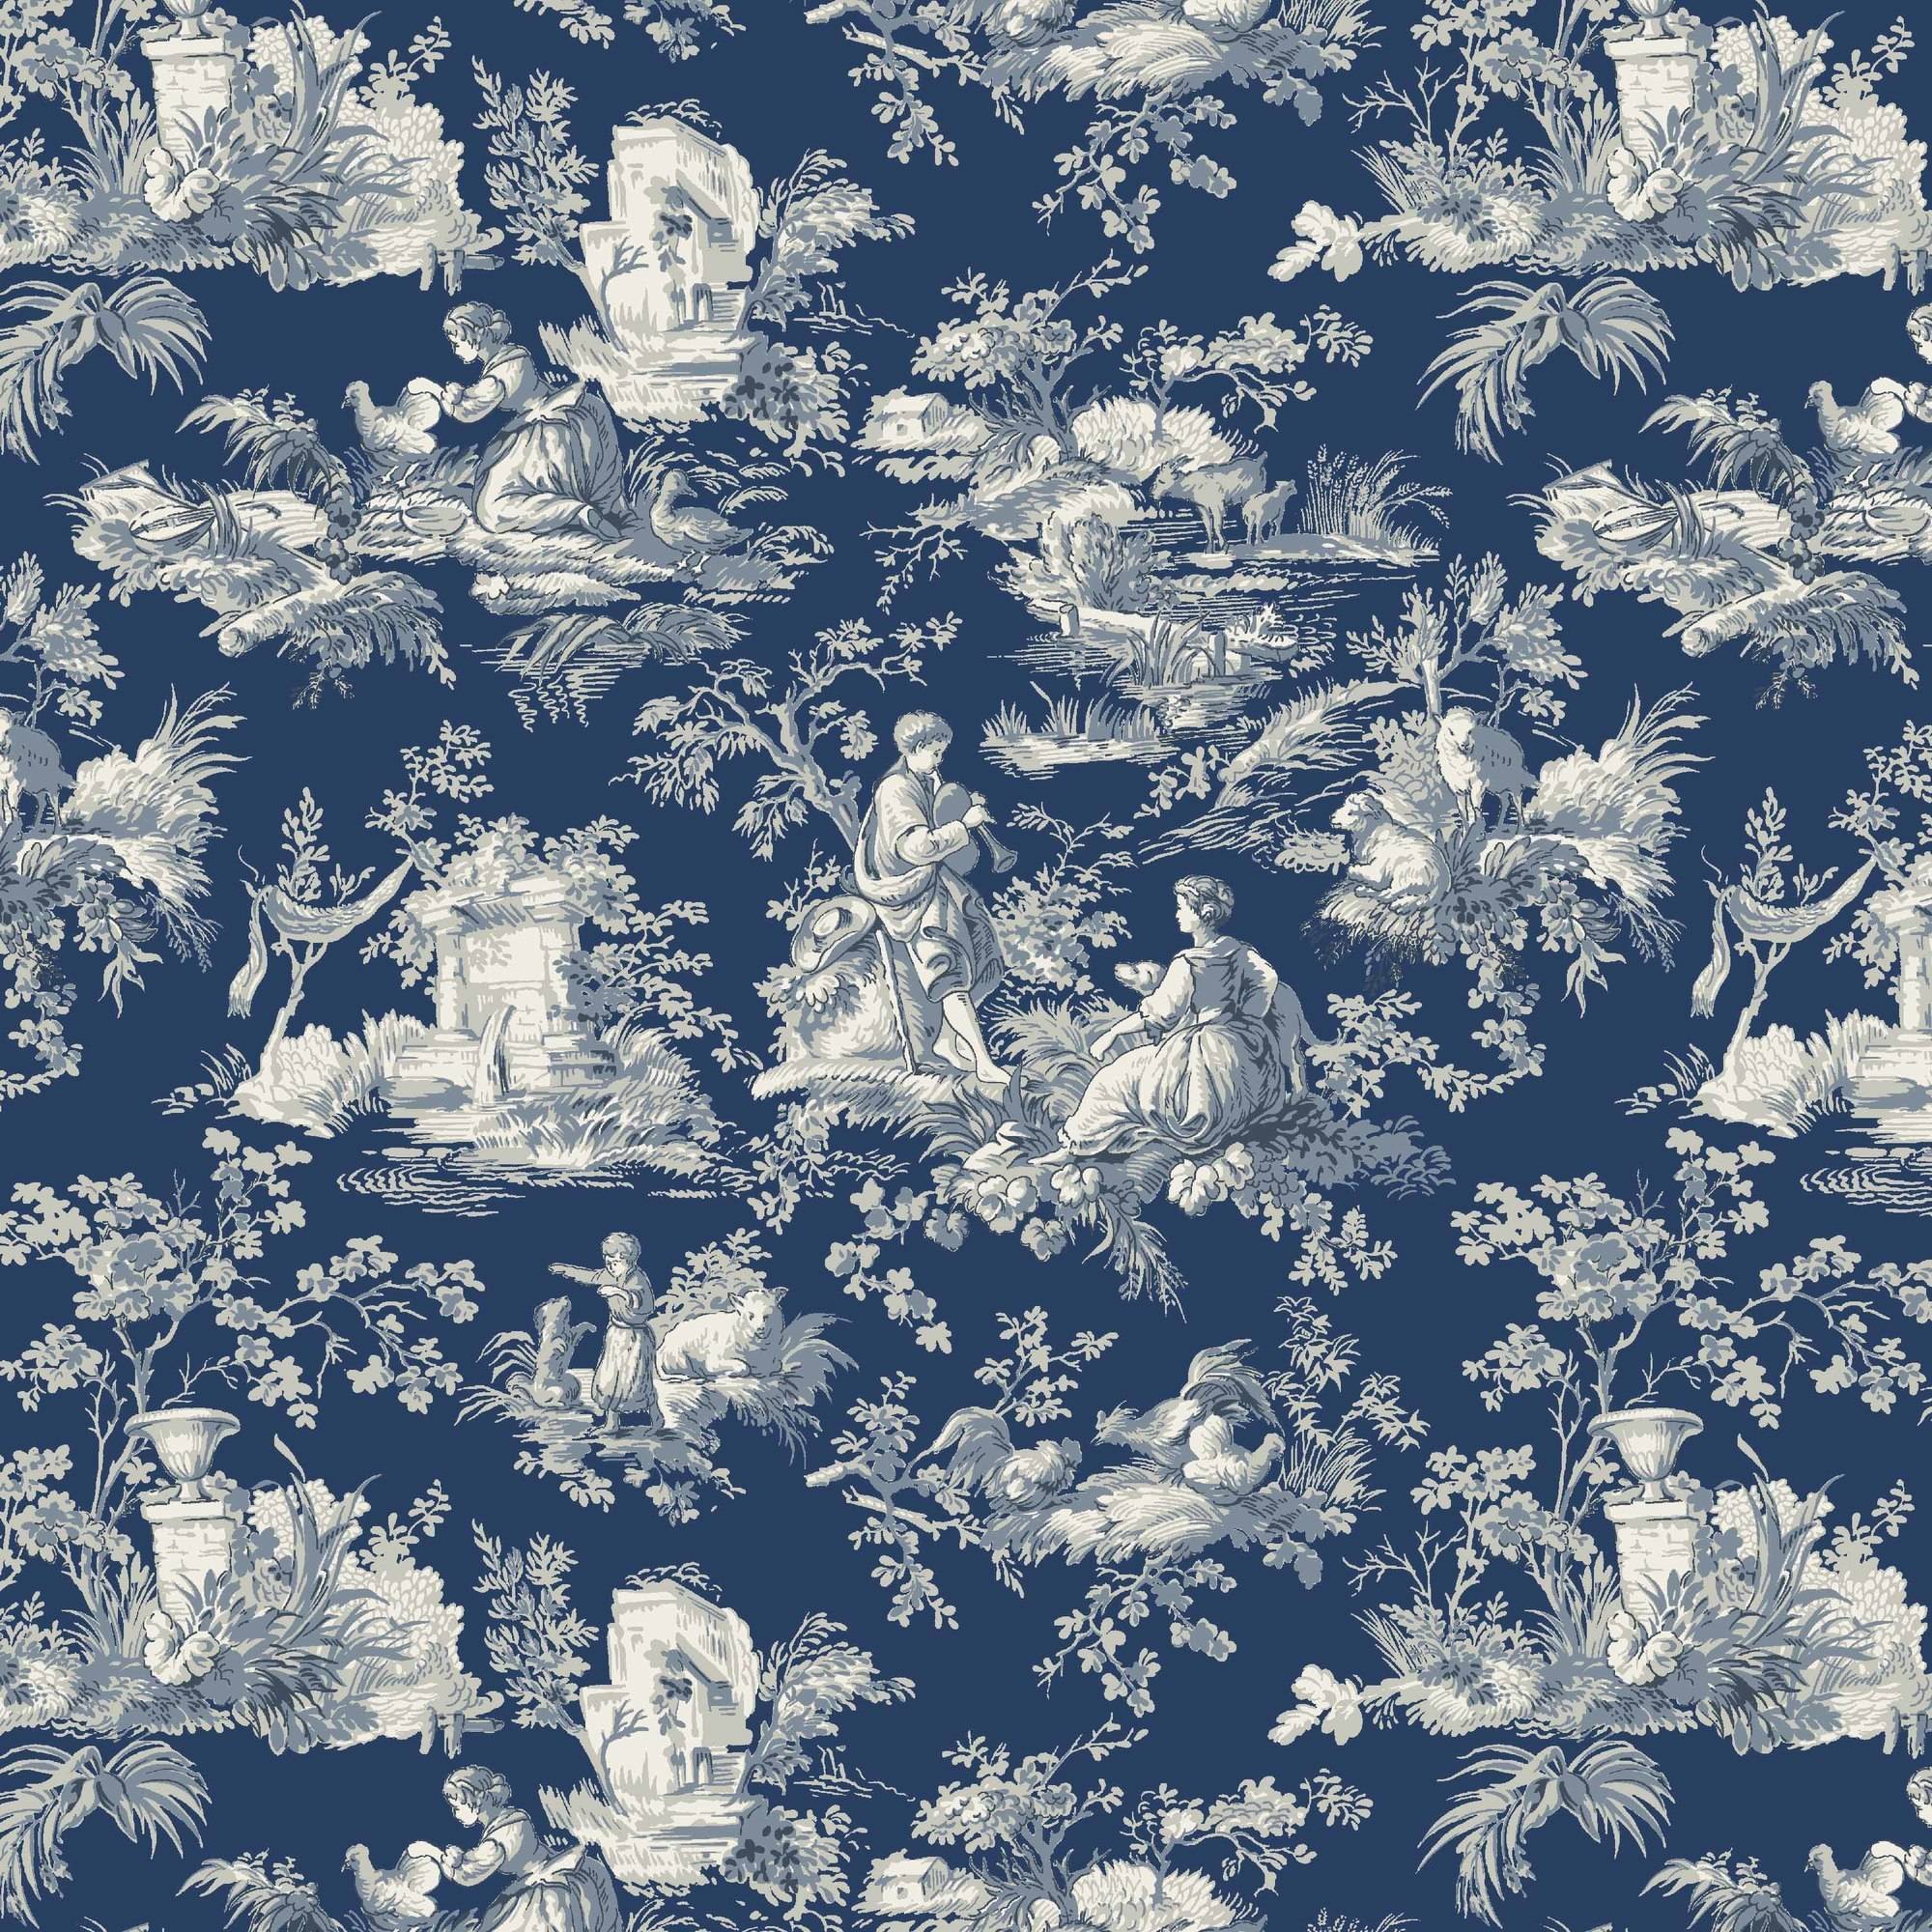 Waverly Inspirations 100% Cotton Duck 45" Width Toile Print Navy Color Sewing Fabric by the Yard